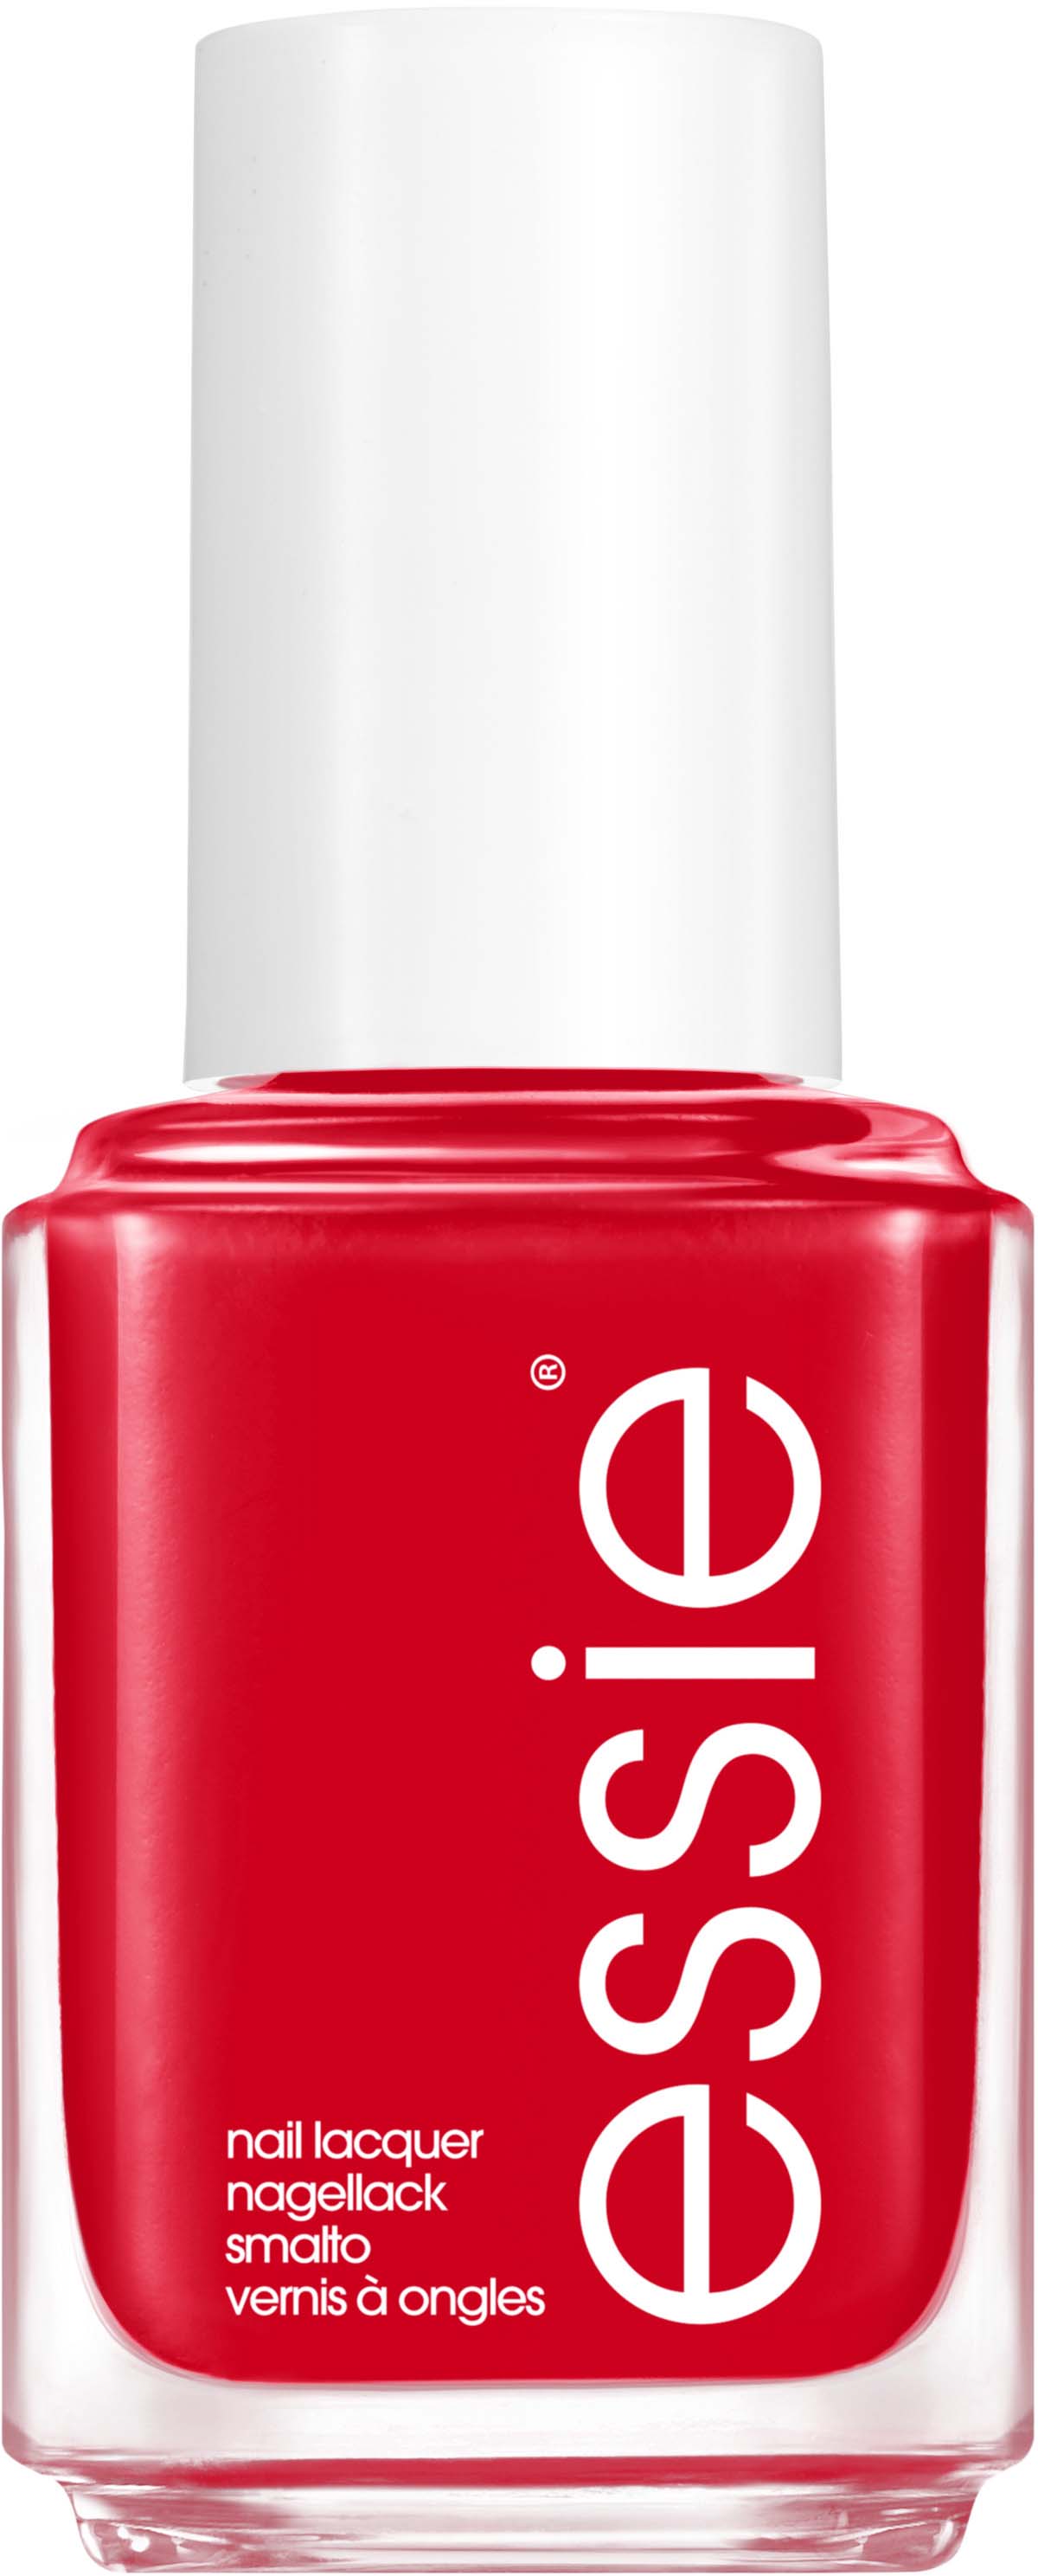 Nail Essie Russian 61 Lacquer Roulette